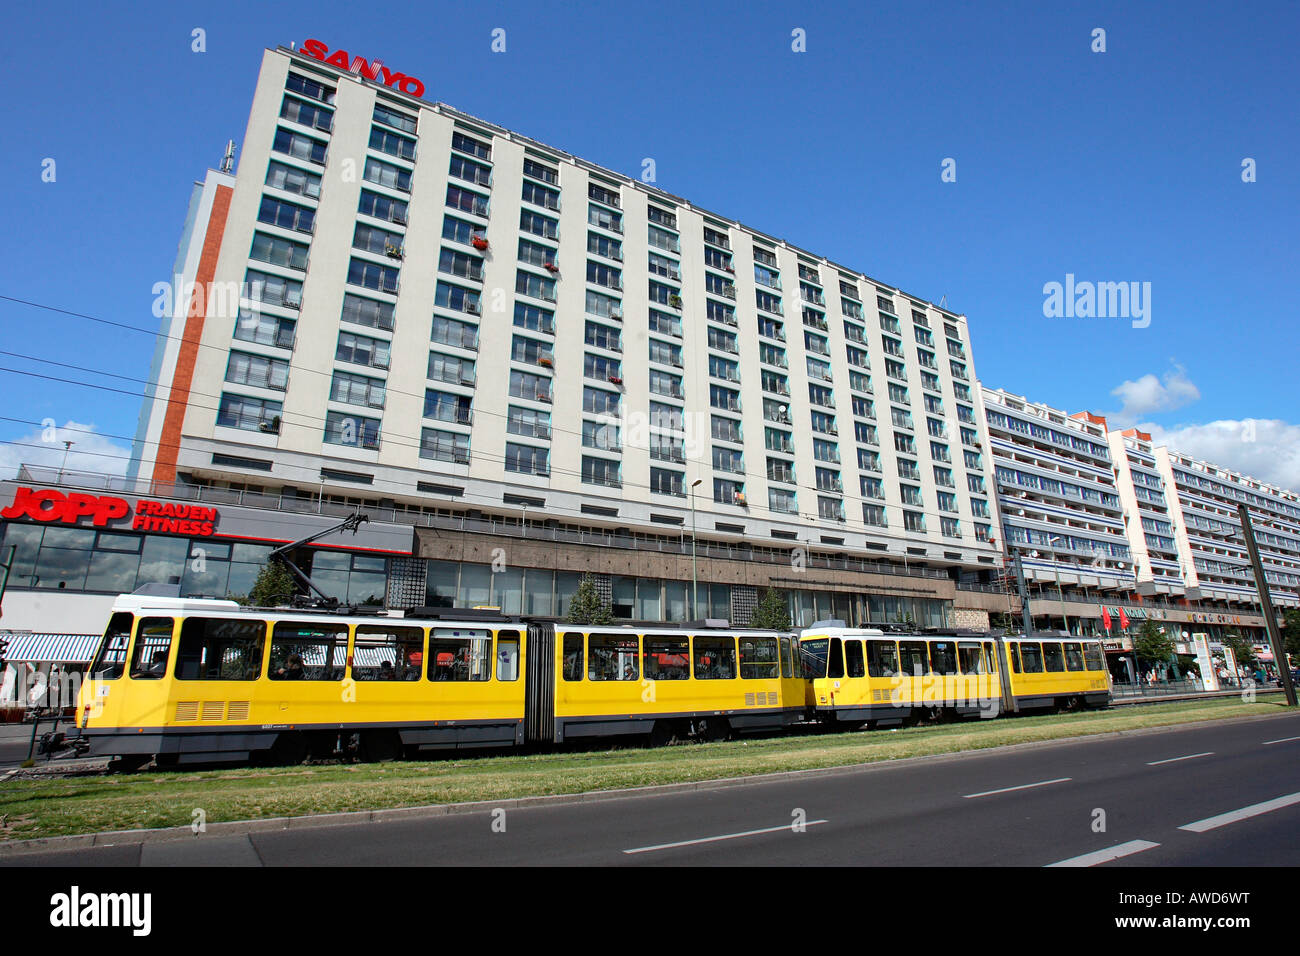 Plattenbau (buidling made with precast concrete slabs) and tram in Berlin, Germany, Europe Stock Photo